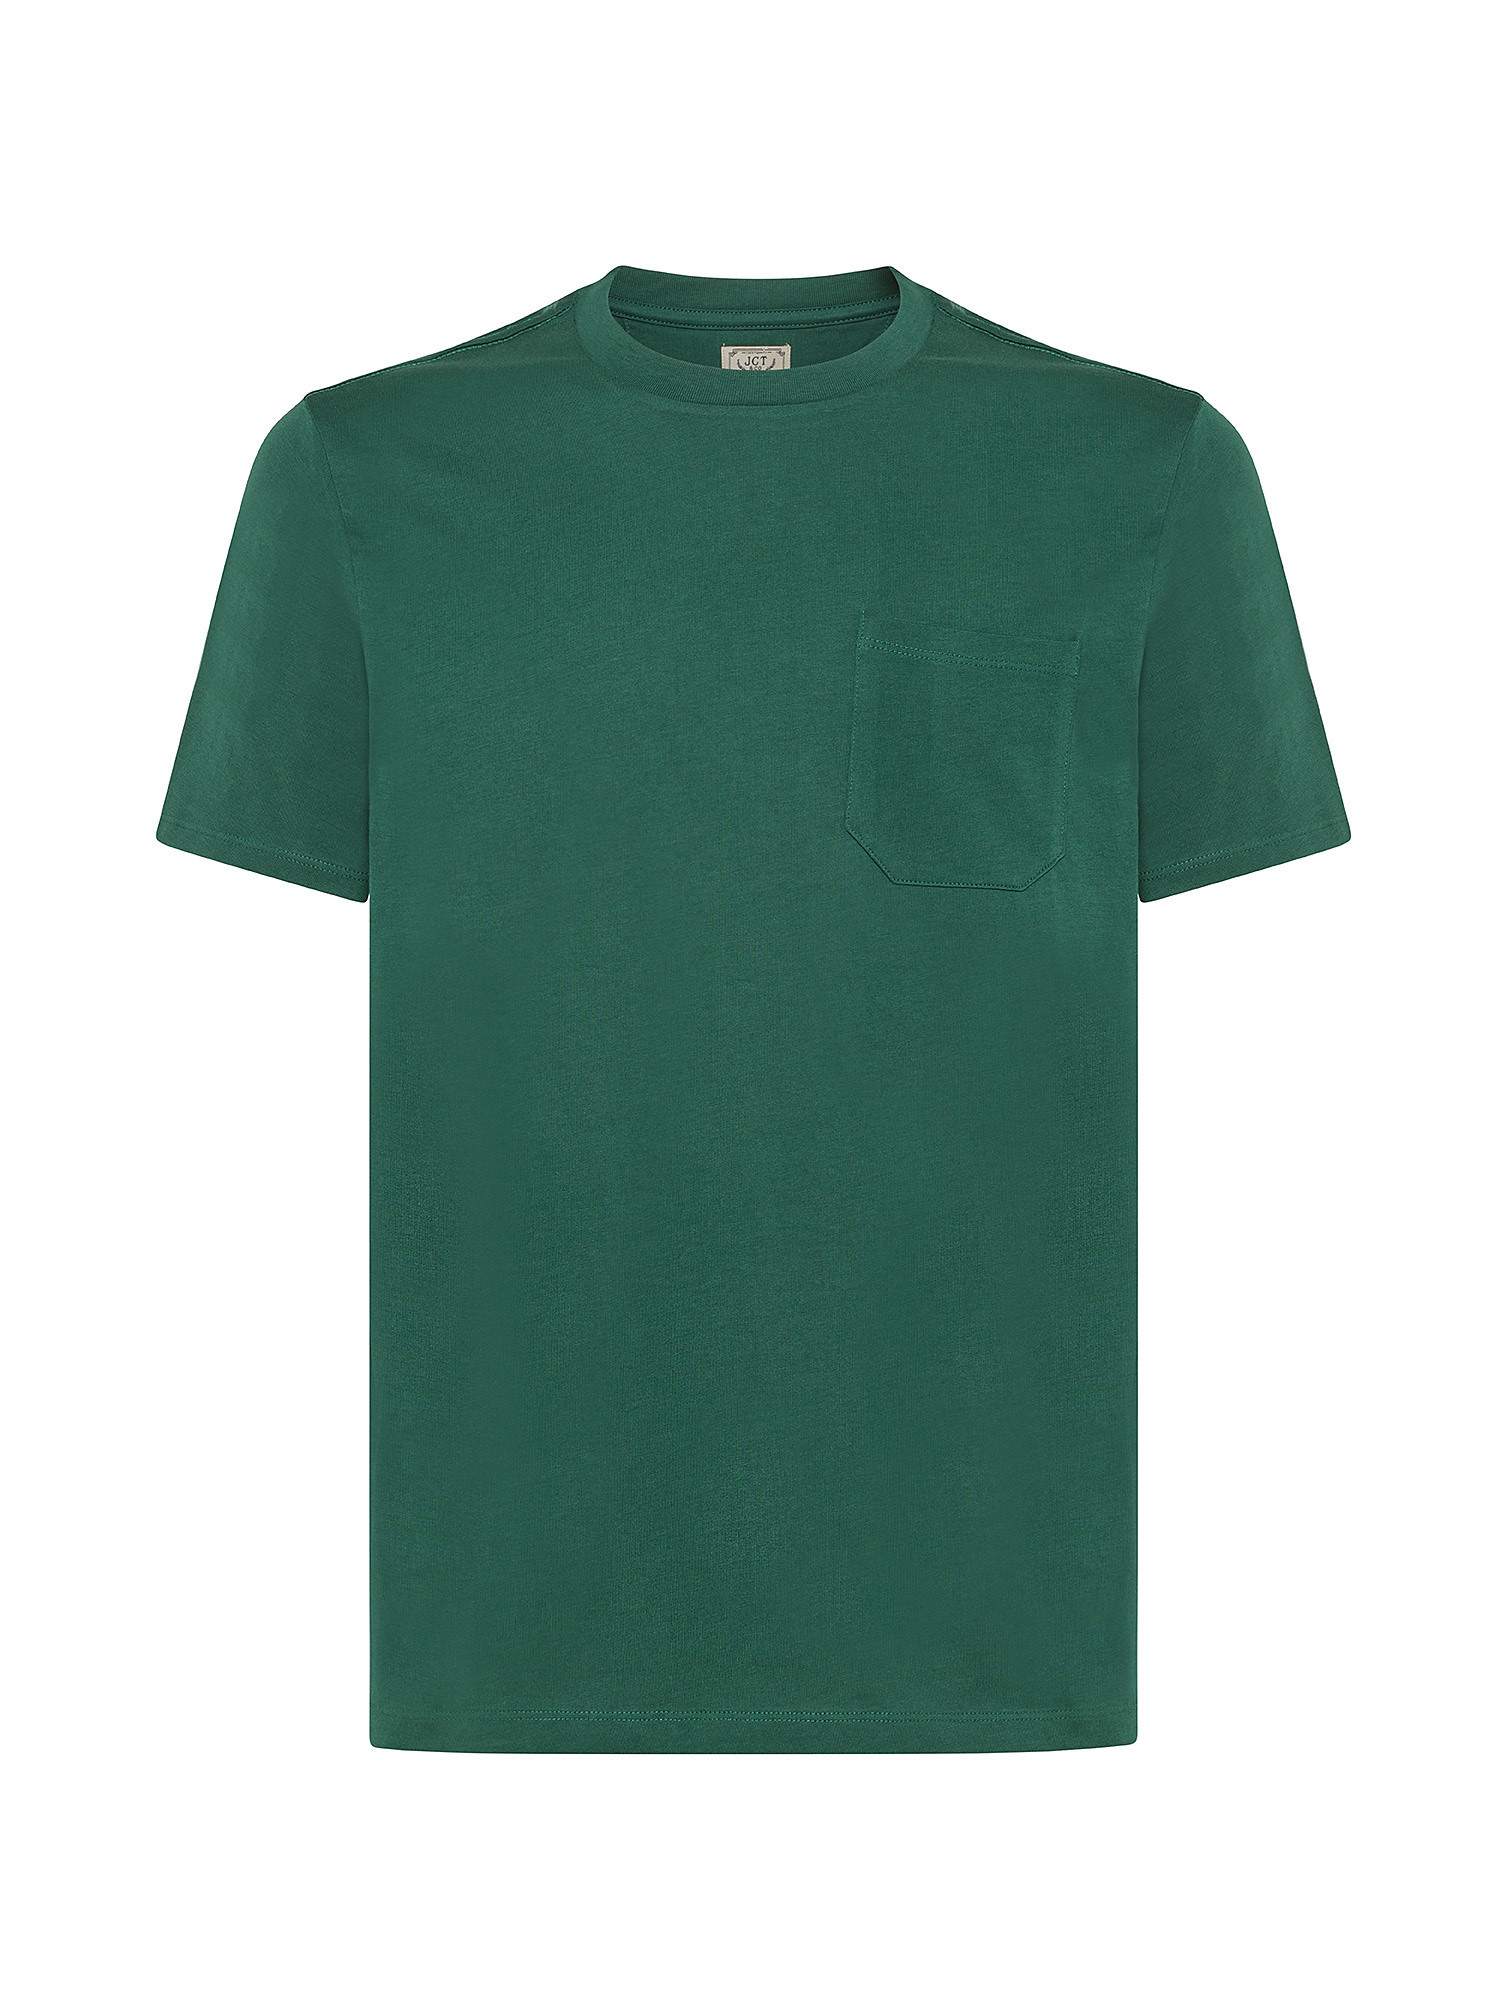 JCT - T-shirt in puro cotone supima, Verde scuro, large image number 0